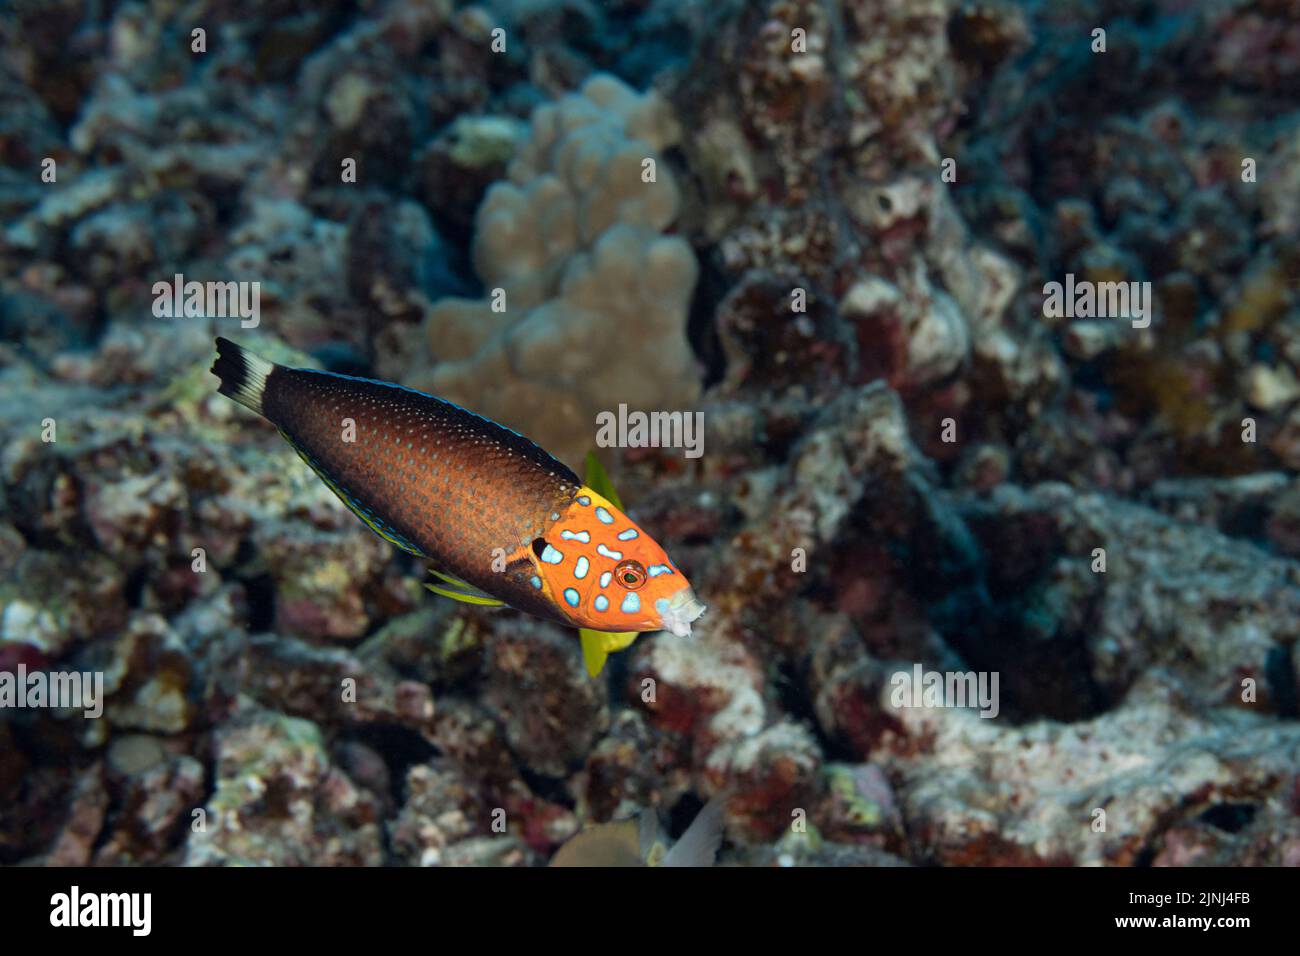 psychedelic wrasse or red tail wrasse, Anampses chrysocephalus, Hawaiian endemic species, terminal male or supermale, mouth open showing fangs, Hawaii Stock Photo